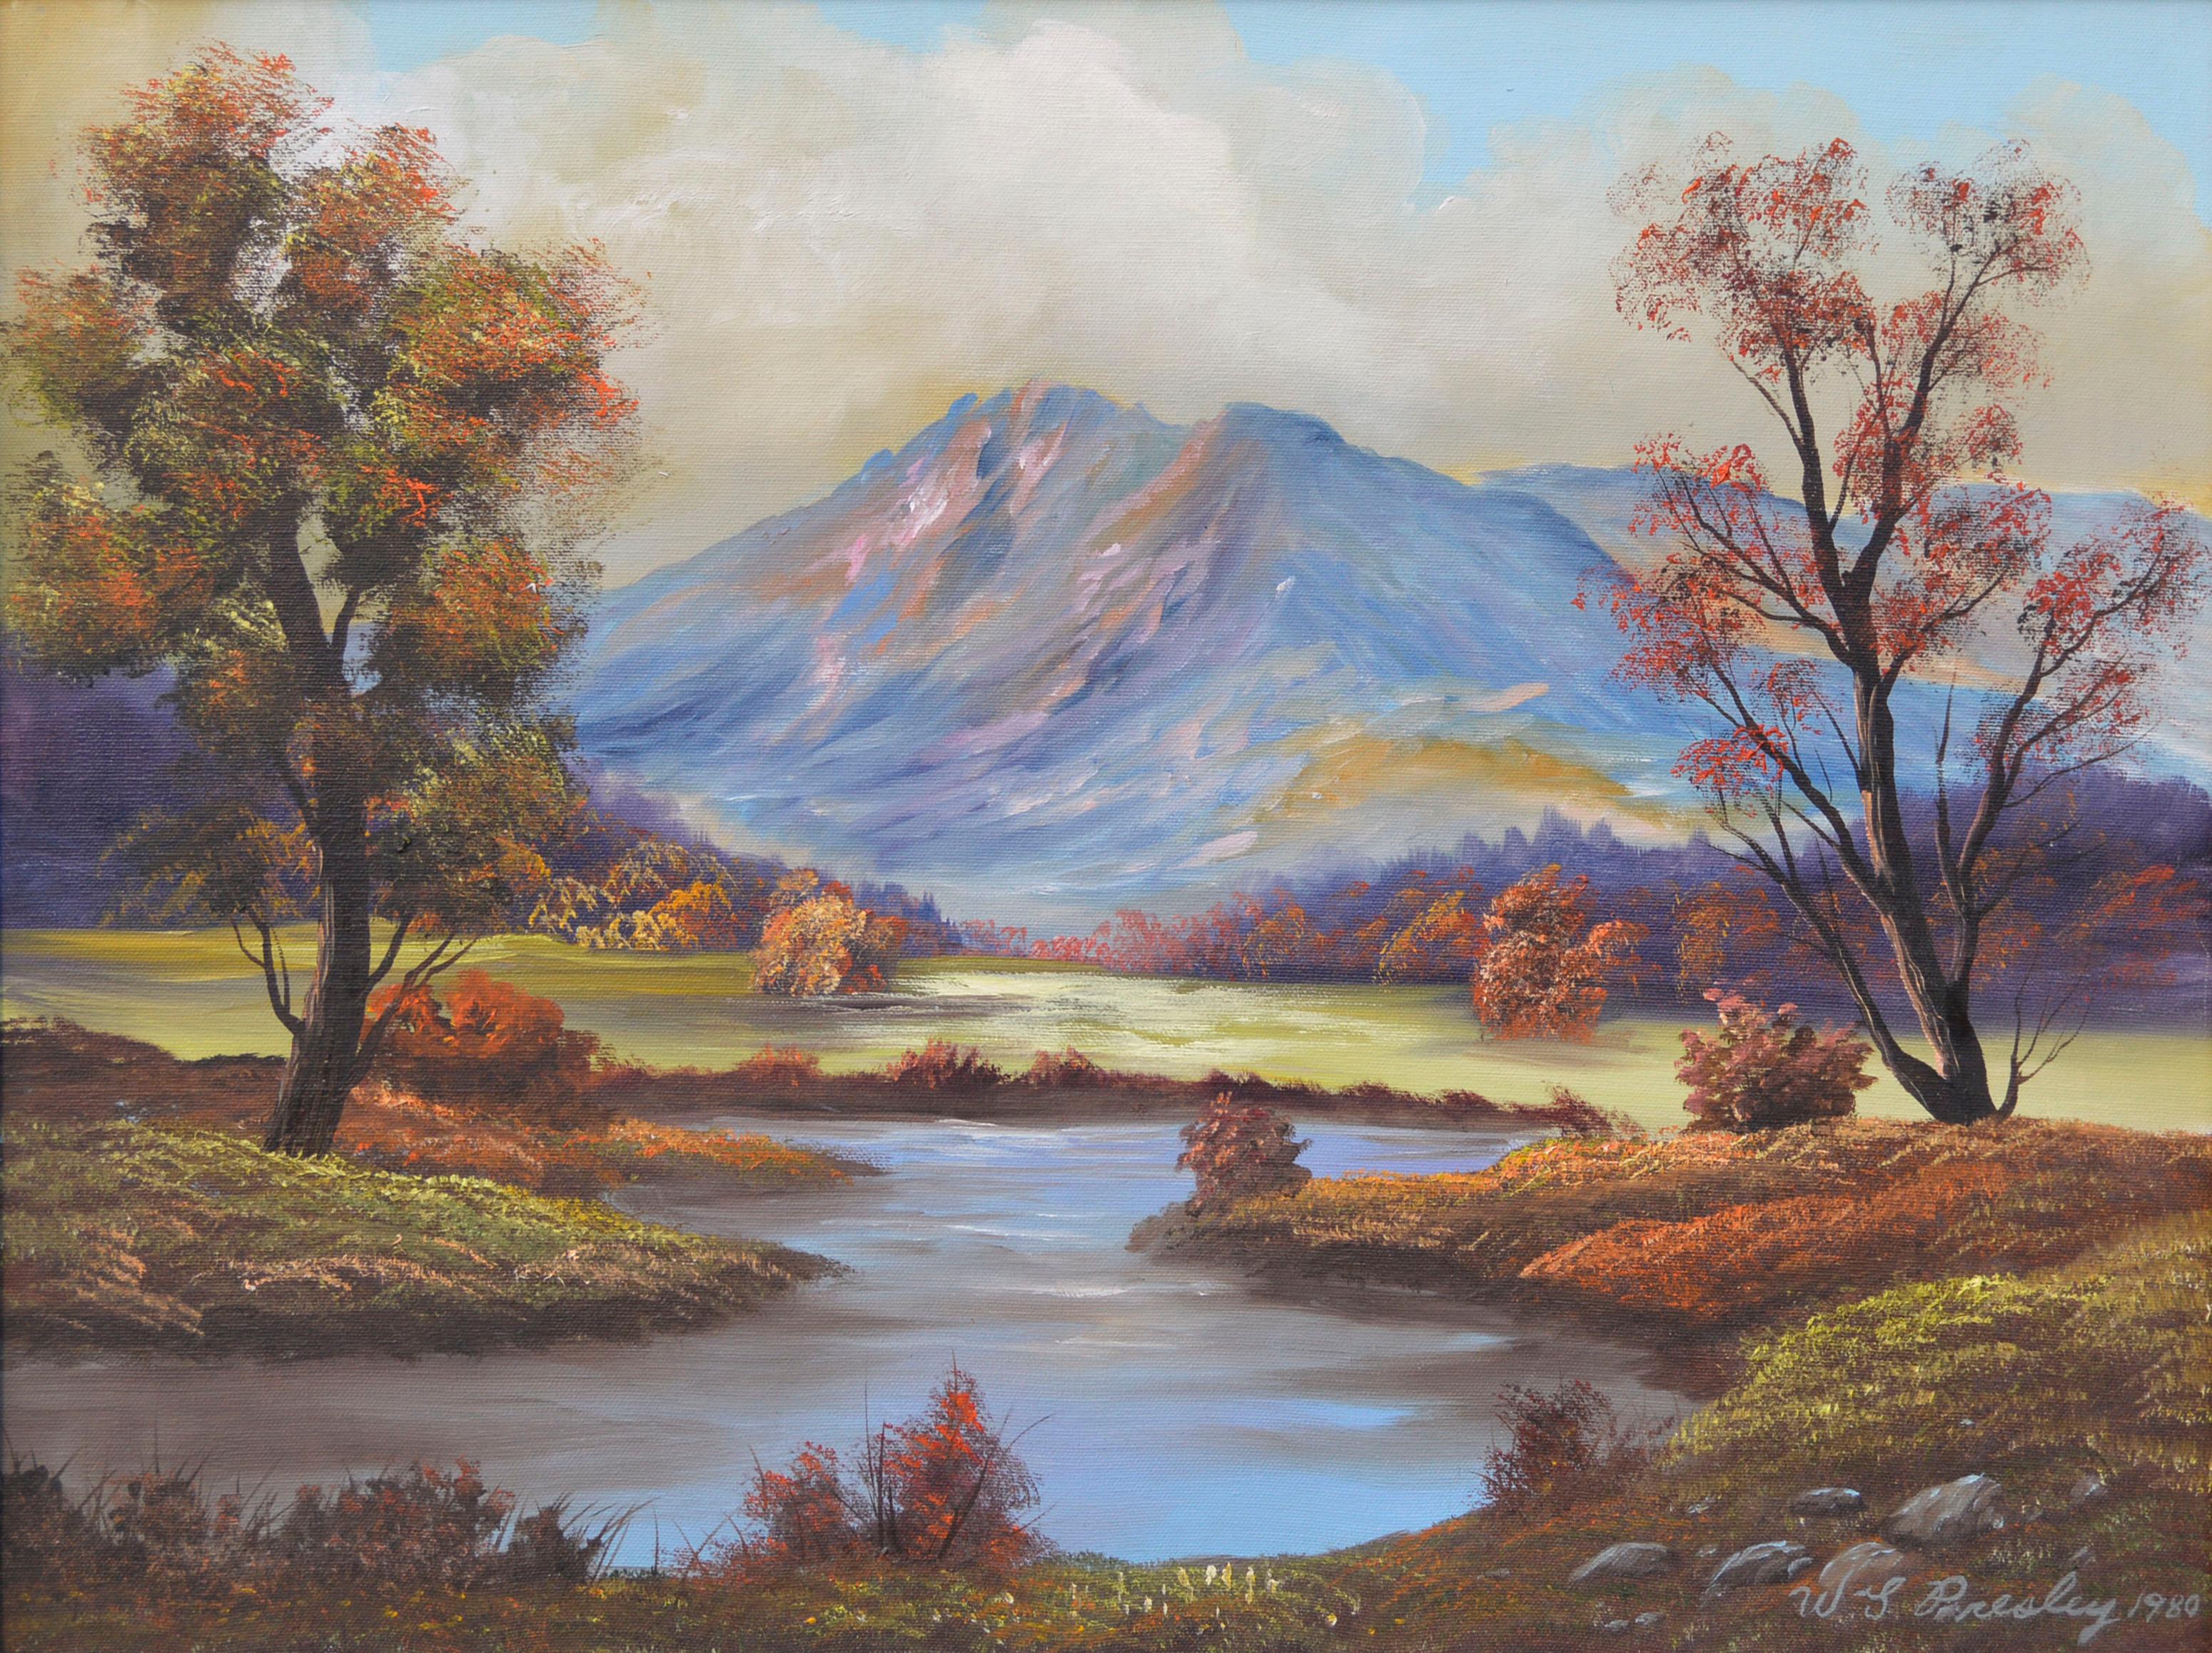 Vintage Landscape Mountain and Pond in Autumn - Painting by W. T. Presley